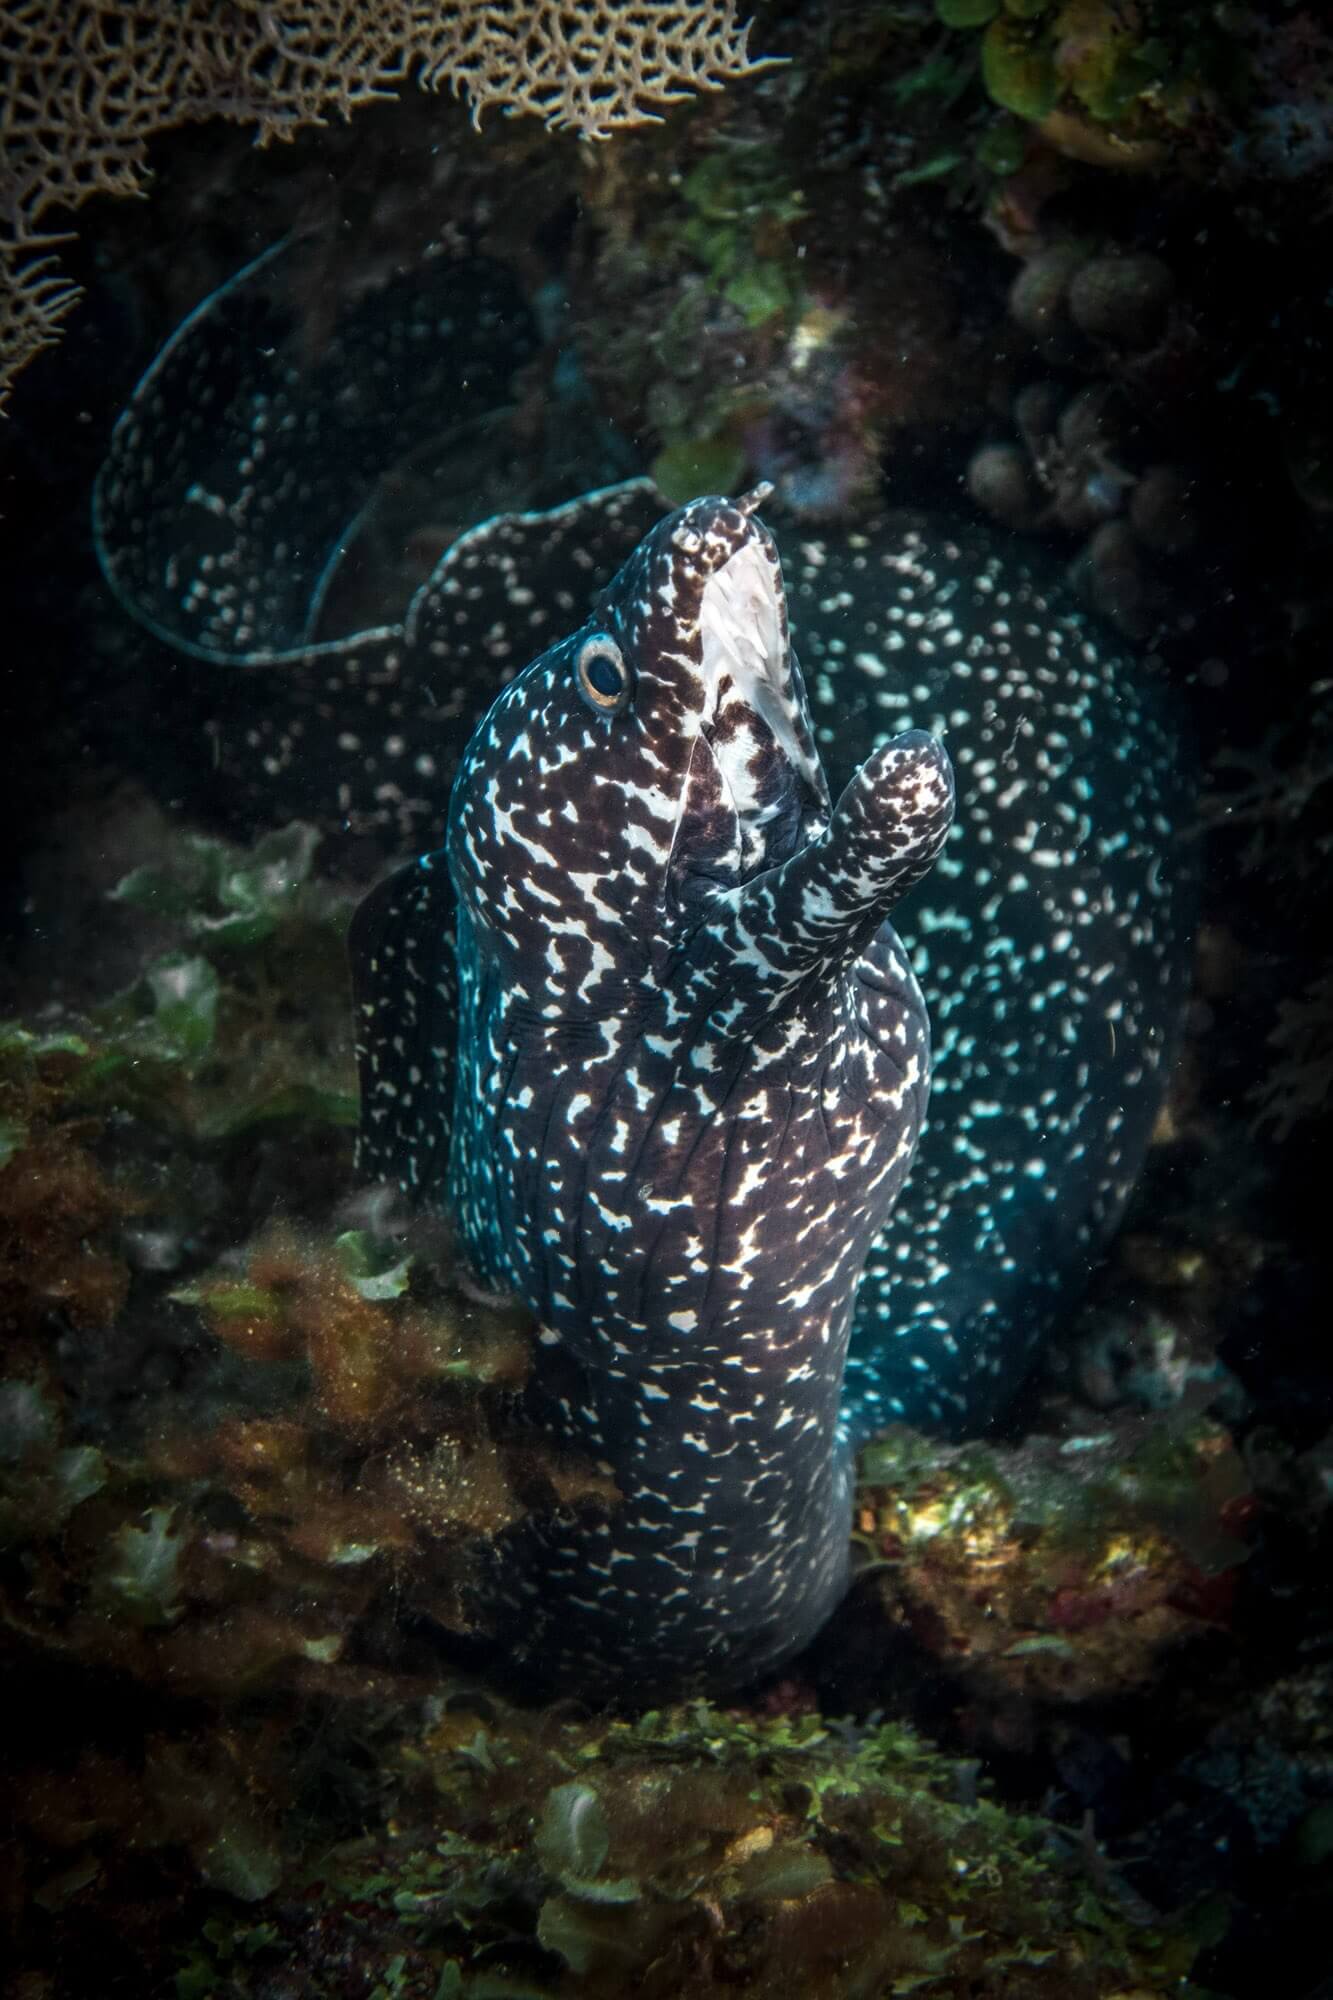 A spotted moray eel